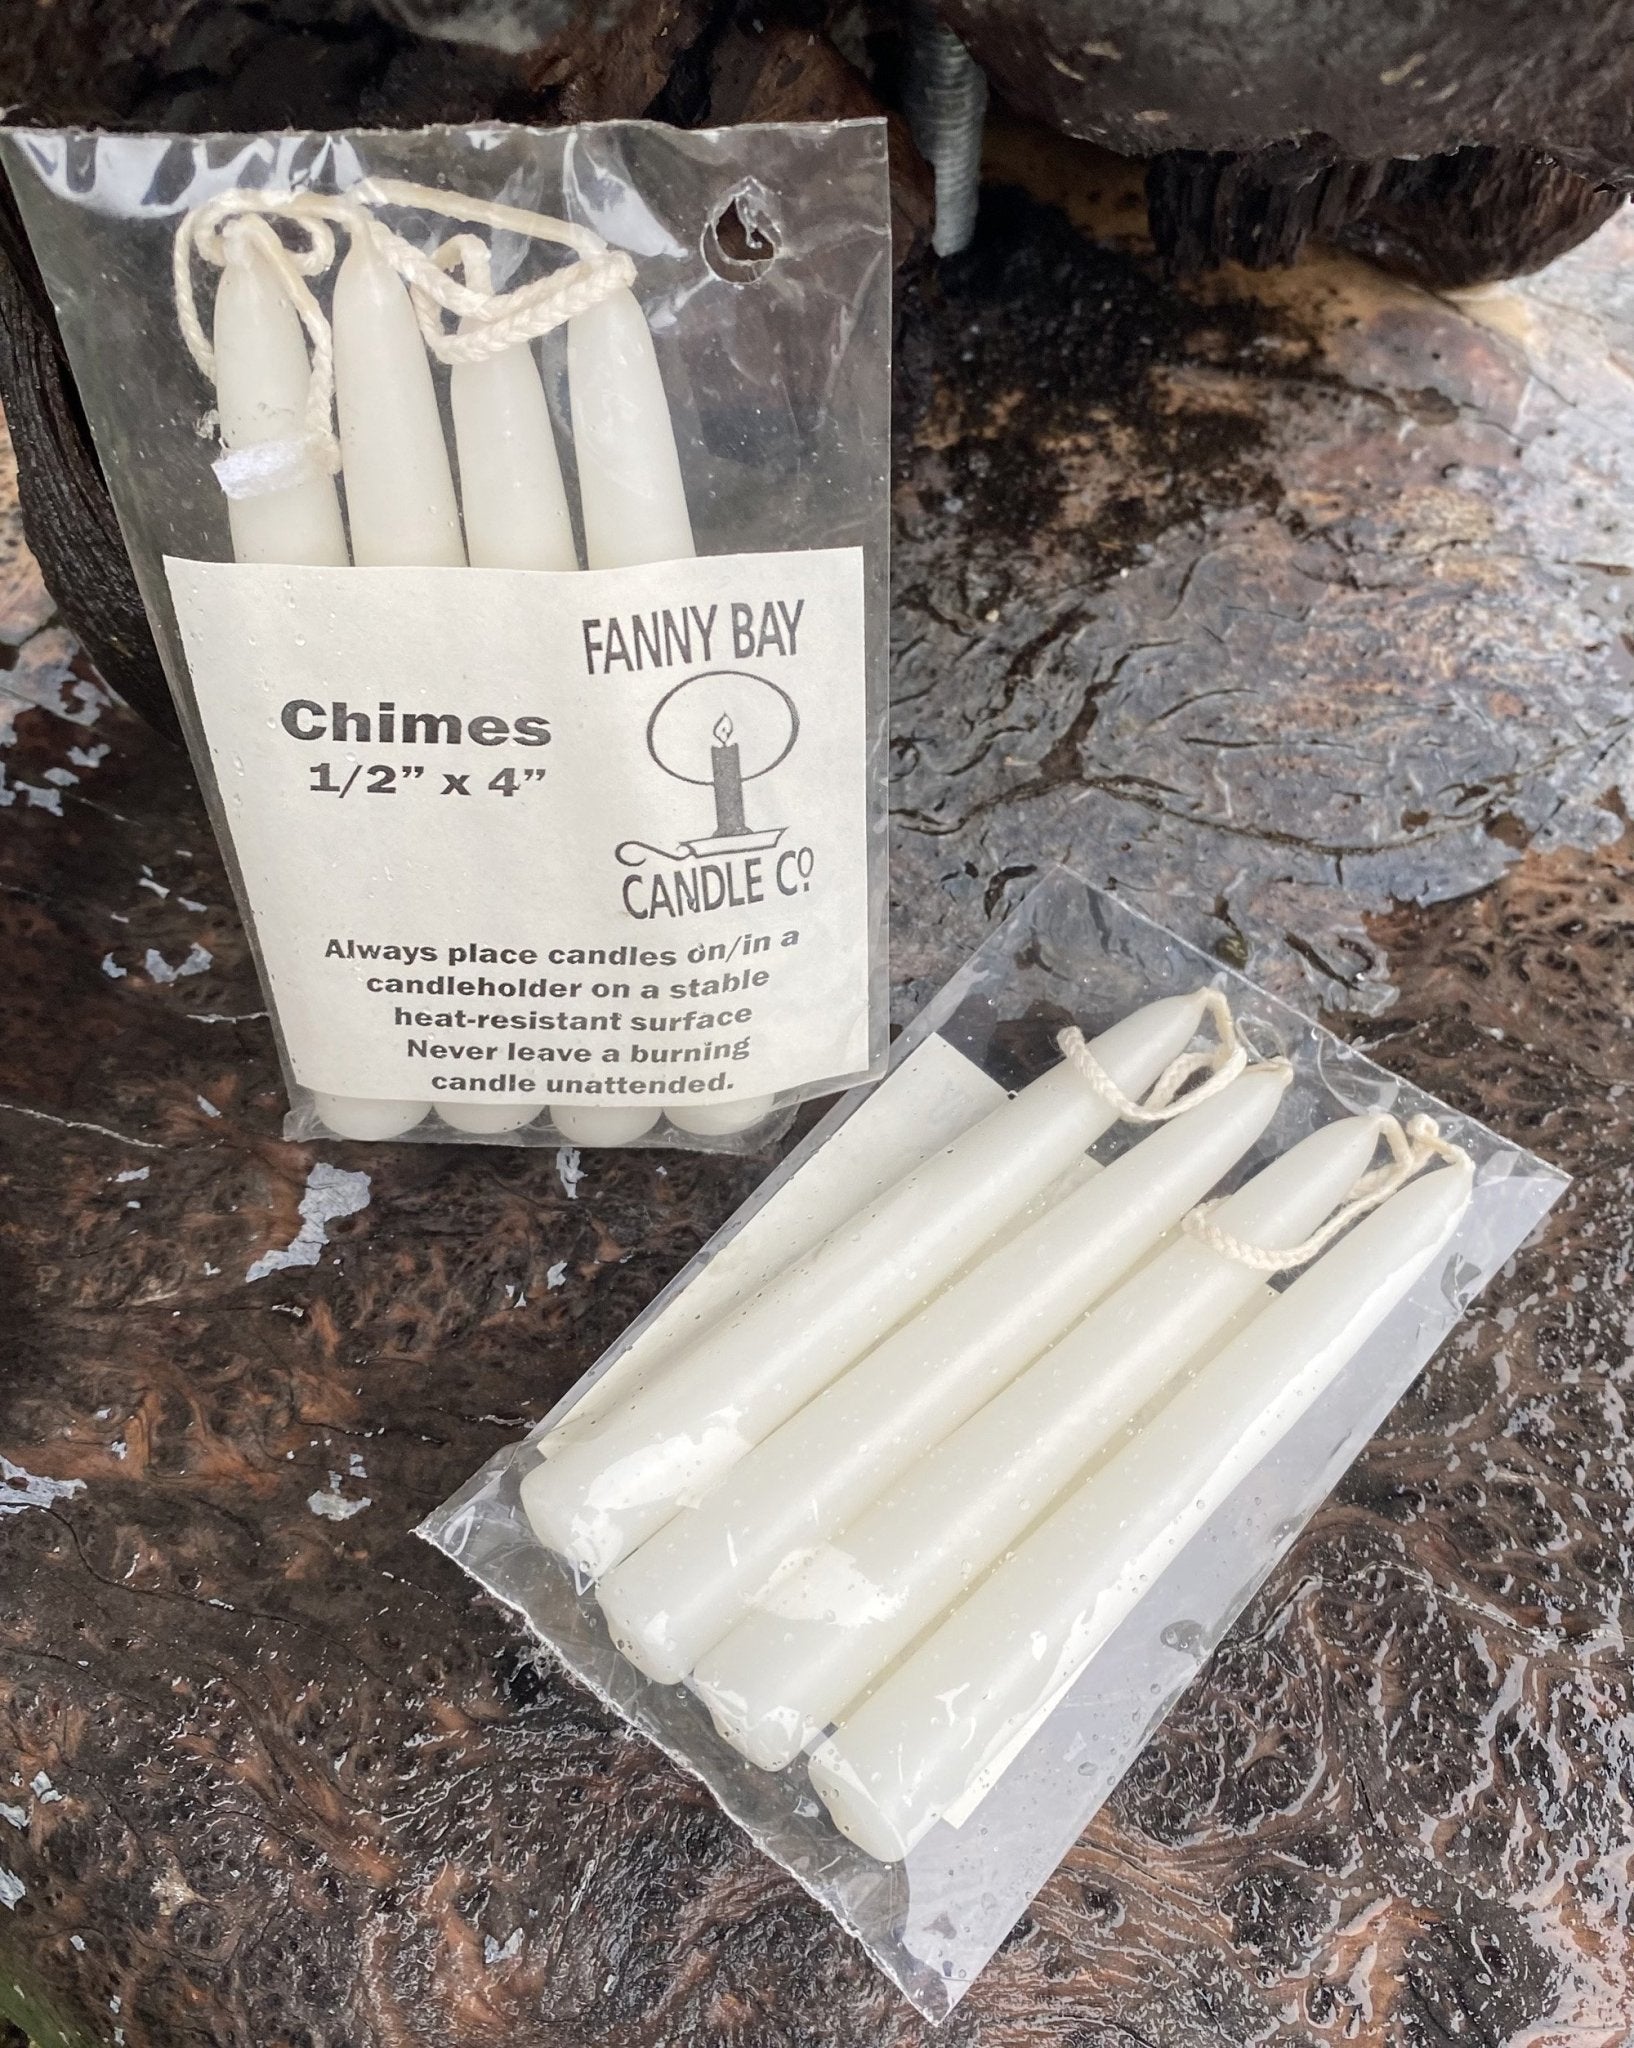 Chime Taper candles,1/2"D x 4“H, white, 2 pairs or 4 singles - Fanny Bay Candle Company